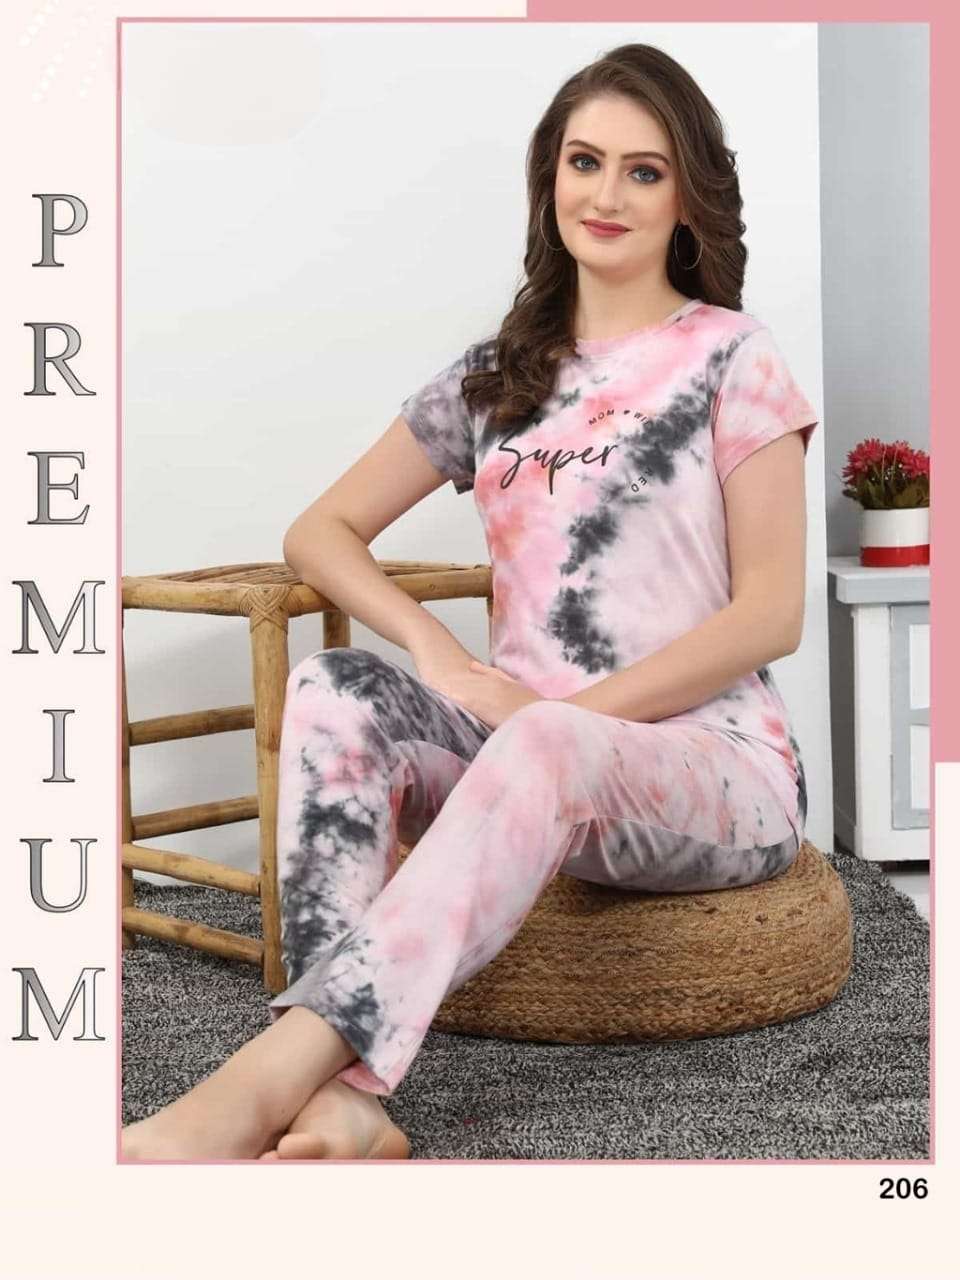 SLEEP WELL VOL 17 PREMIUM HOSIERY NIGHT SUITBY S3 FOREVER  BRAND WHOLESALR AND DELER